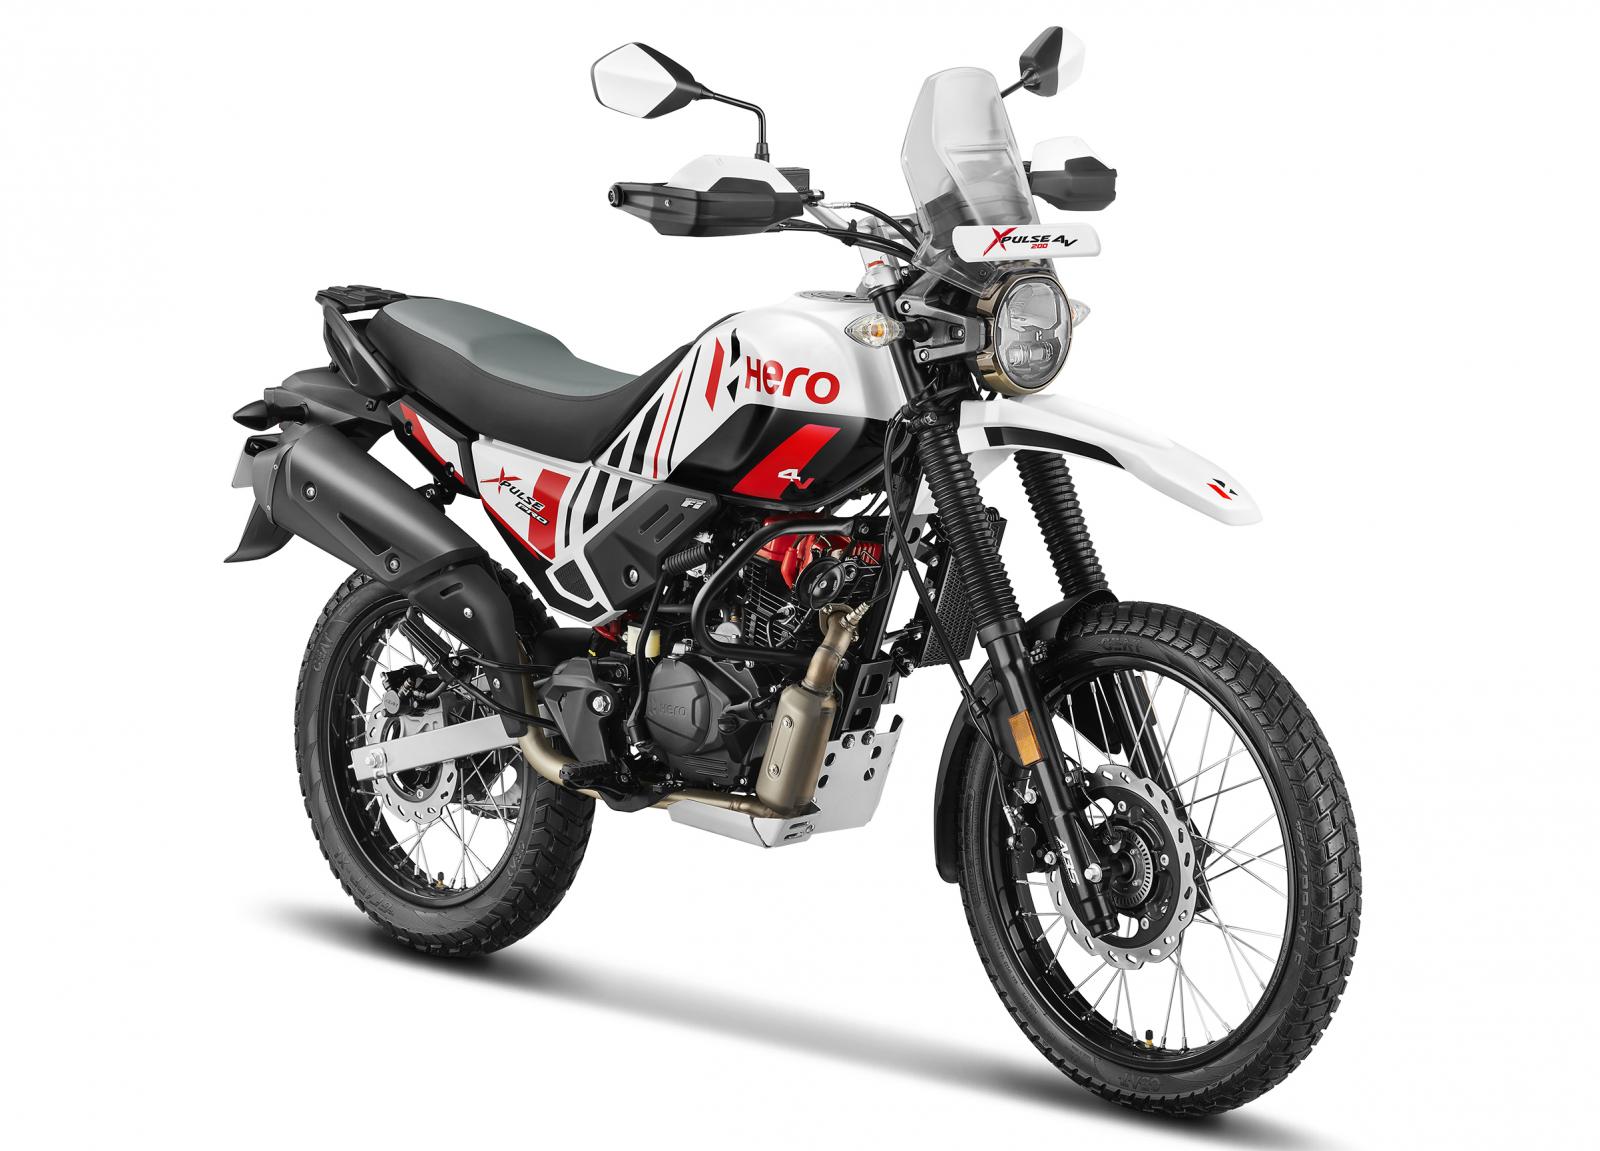 2023 Hero Xpulse 200 4V Launched, Gets ABS Modes, New Headlight